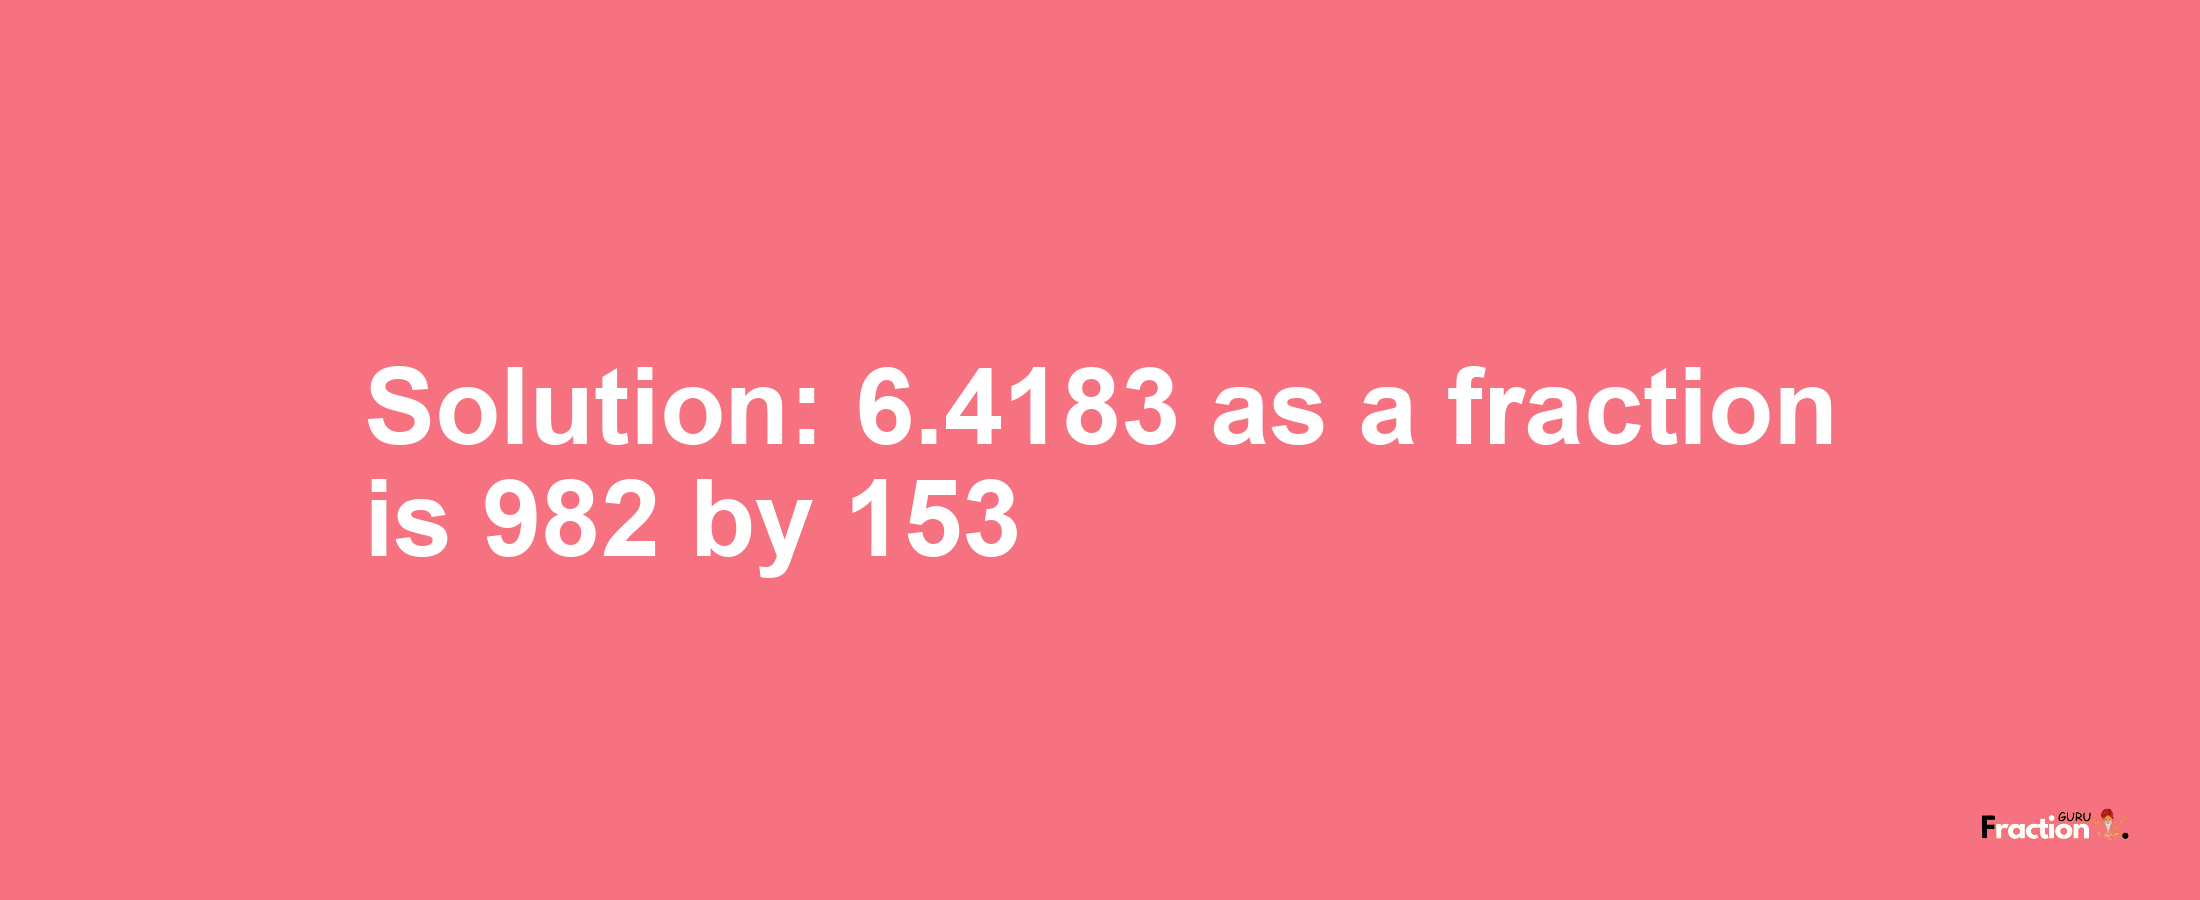 Solution:6.4183 as a fraction is 982/153